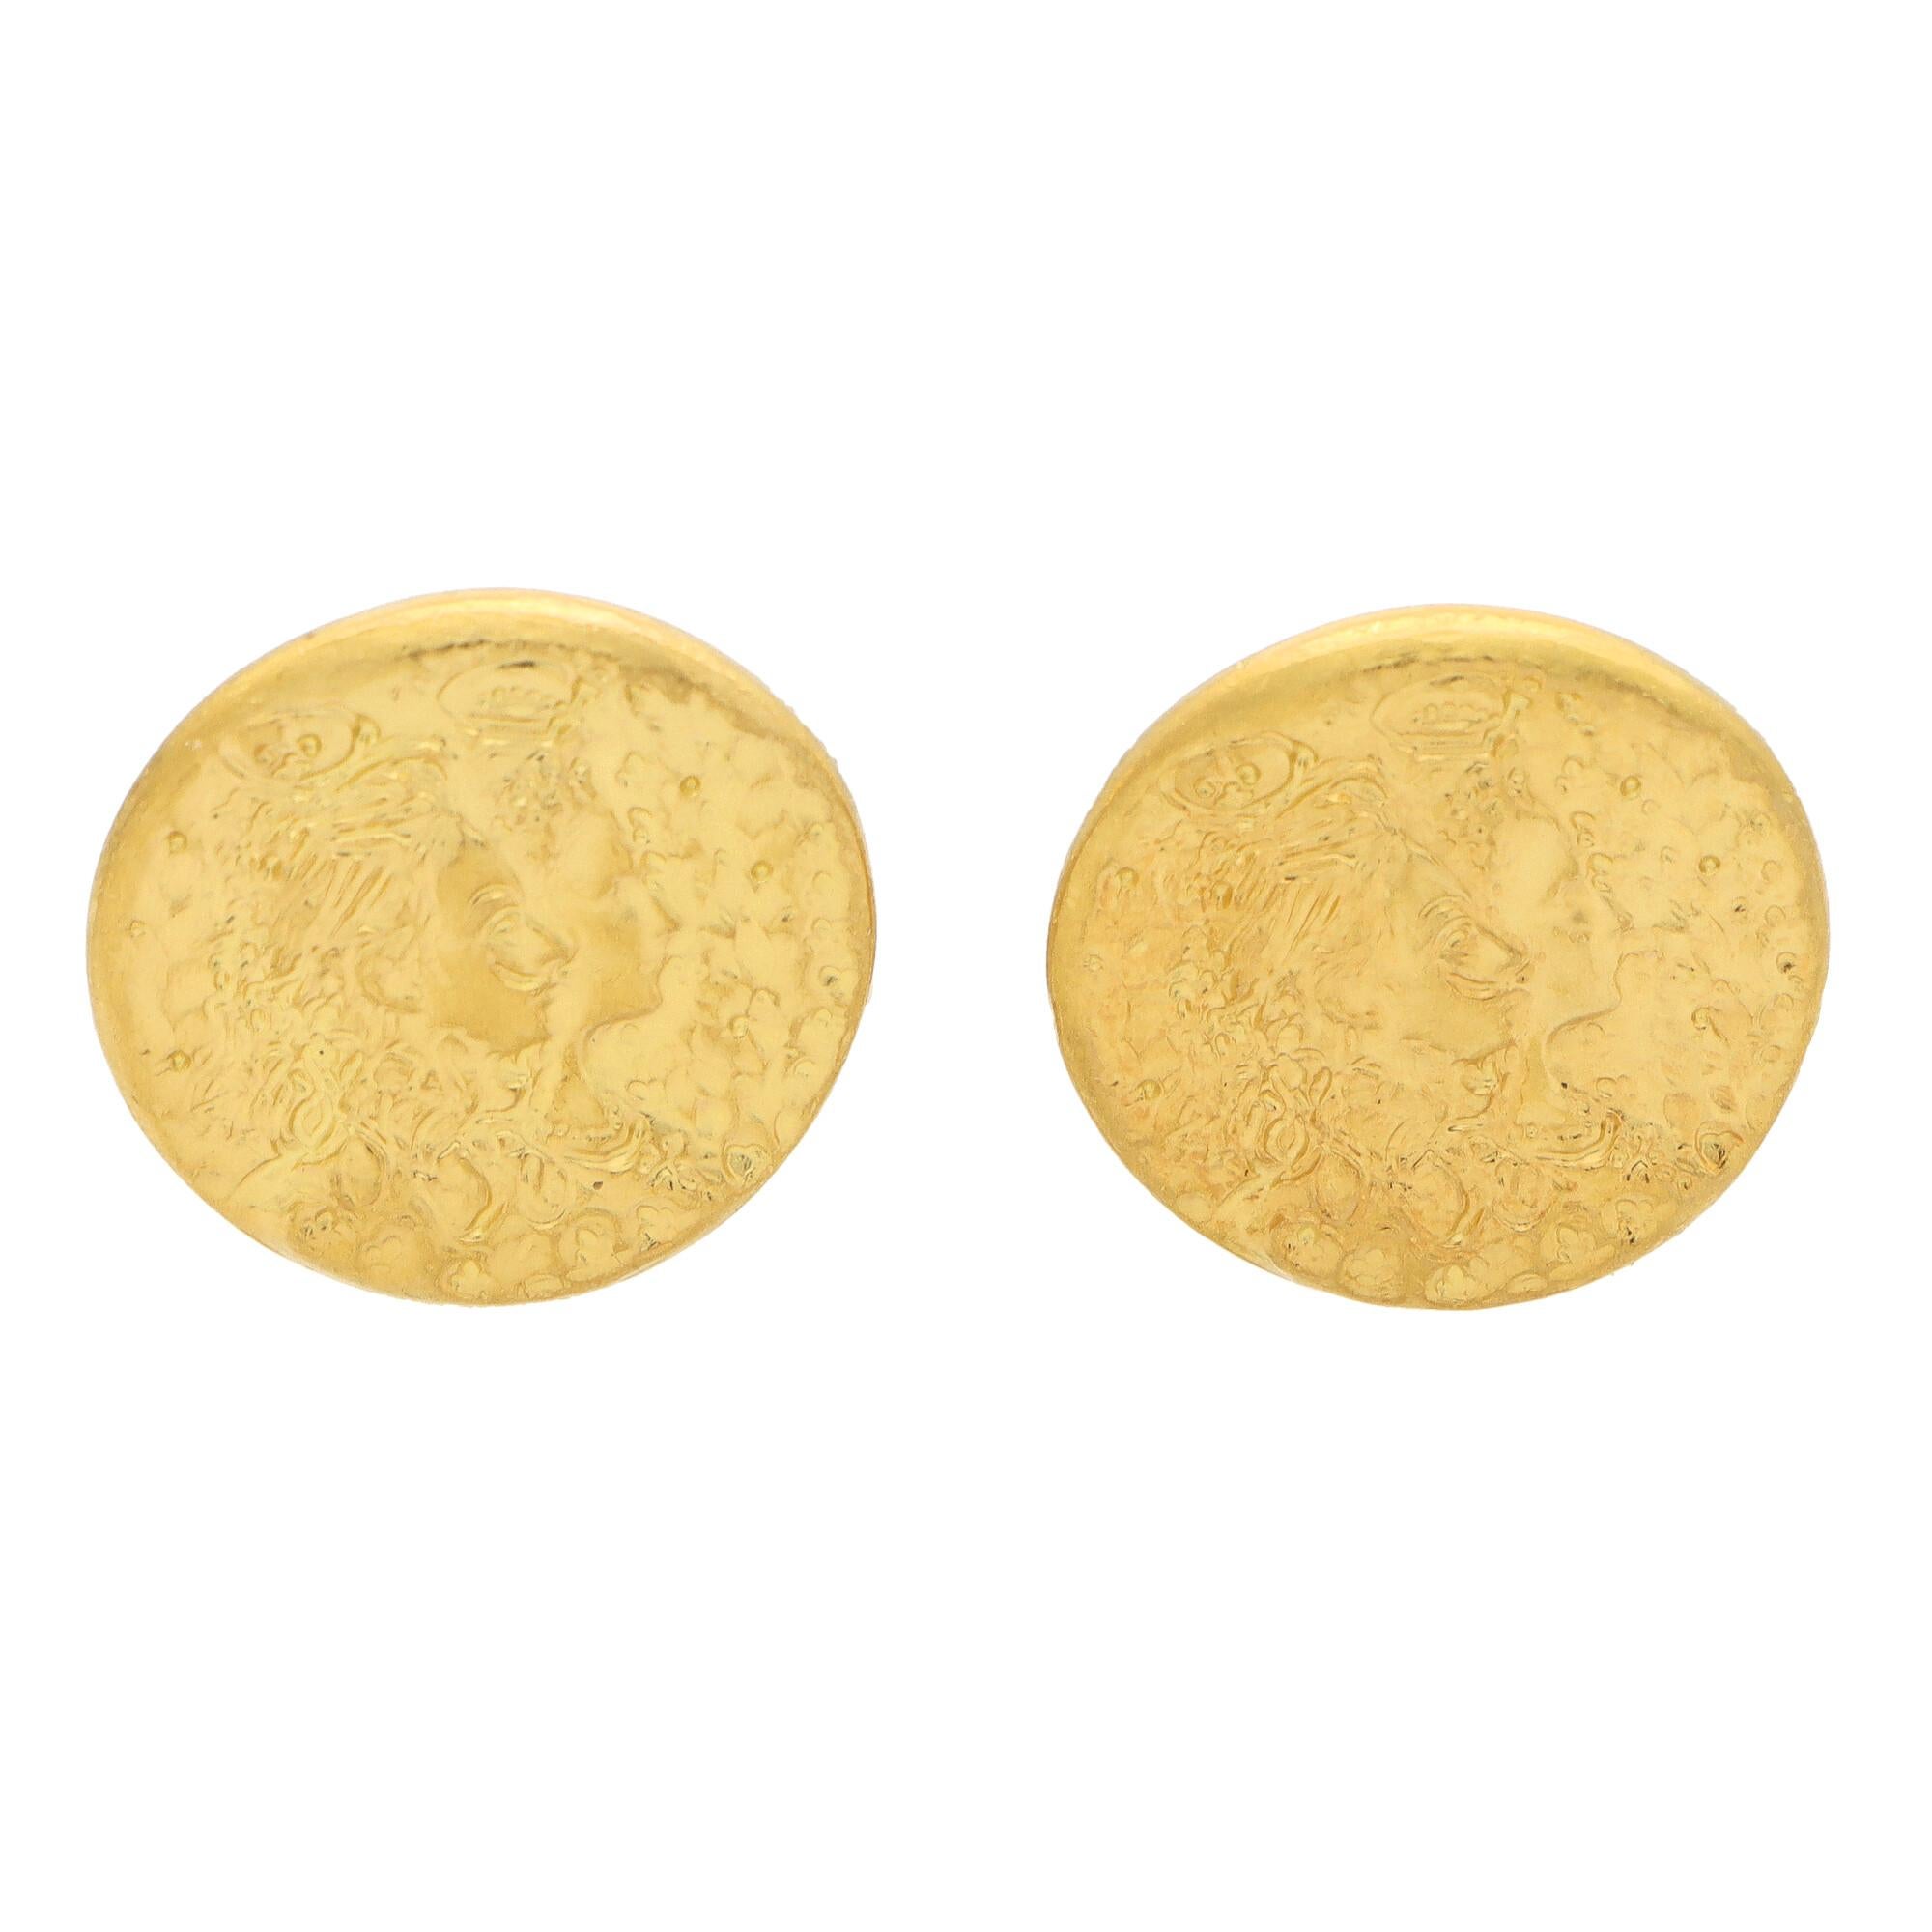 Retro Limited Edition Vintage Salvador Dali for Piaget Coin Cufflinks in Yellow Gold